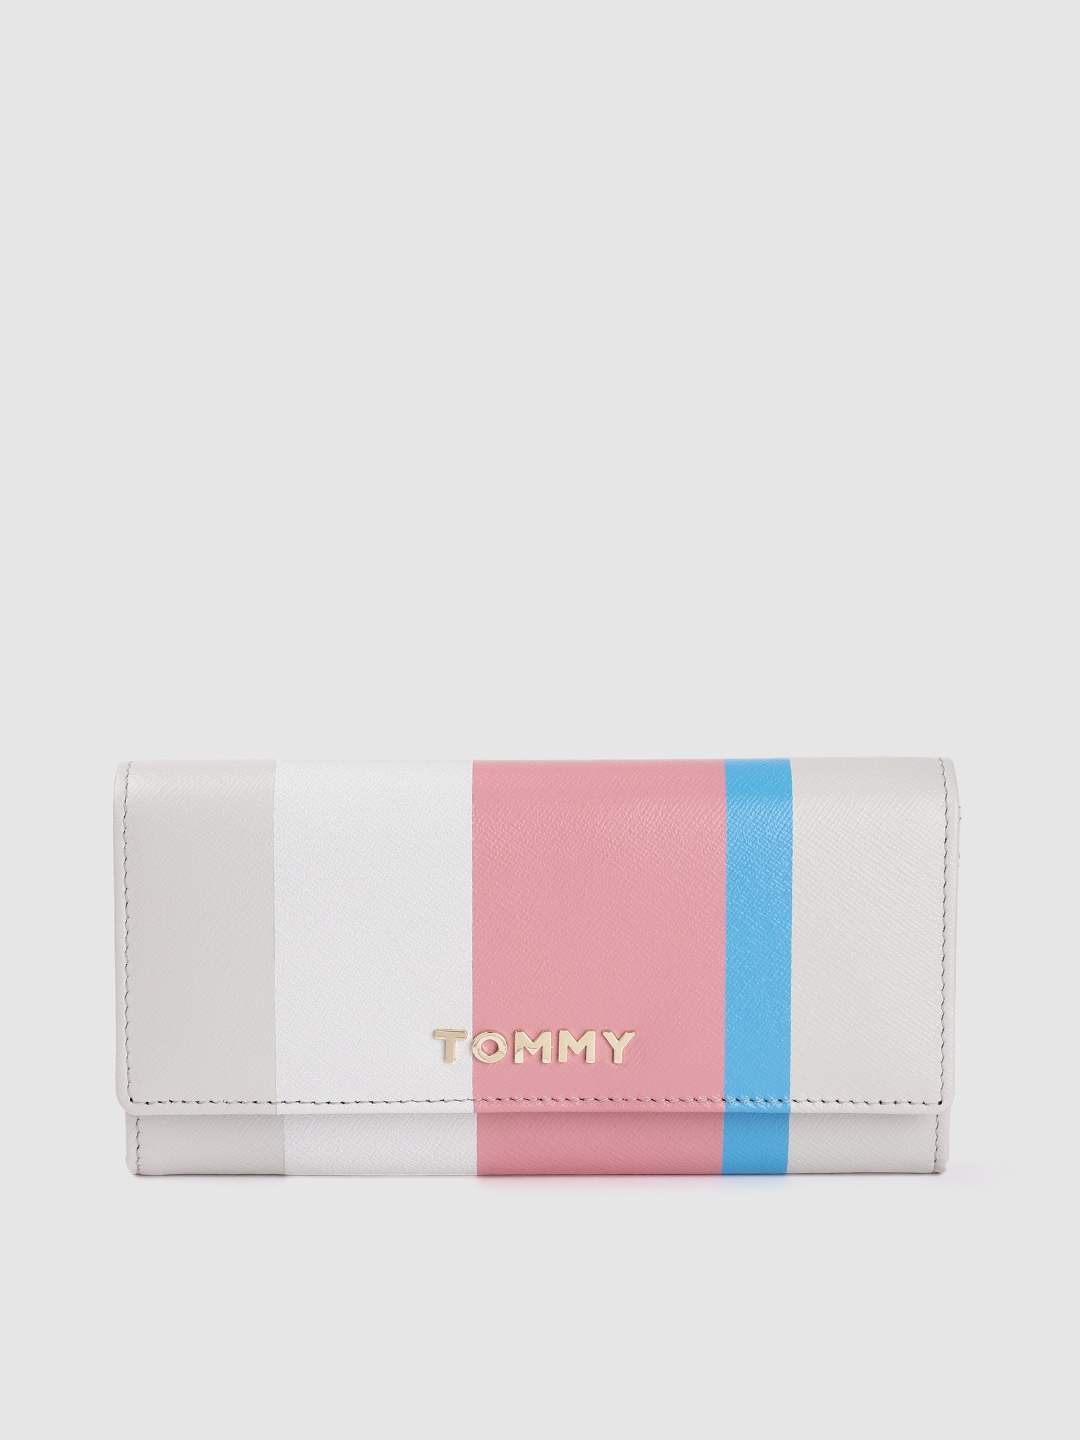 Tommy Hilfiger Women White & Blue Colourblocked Leather Two Fold Wallet Price in India